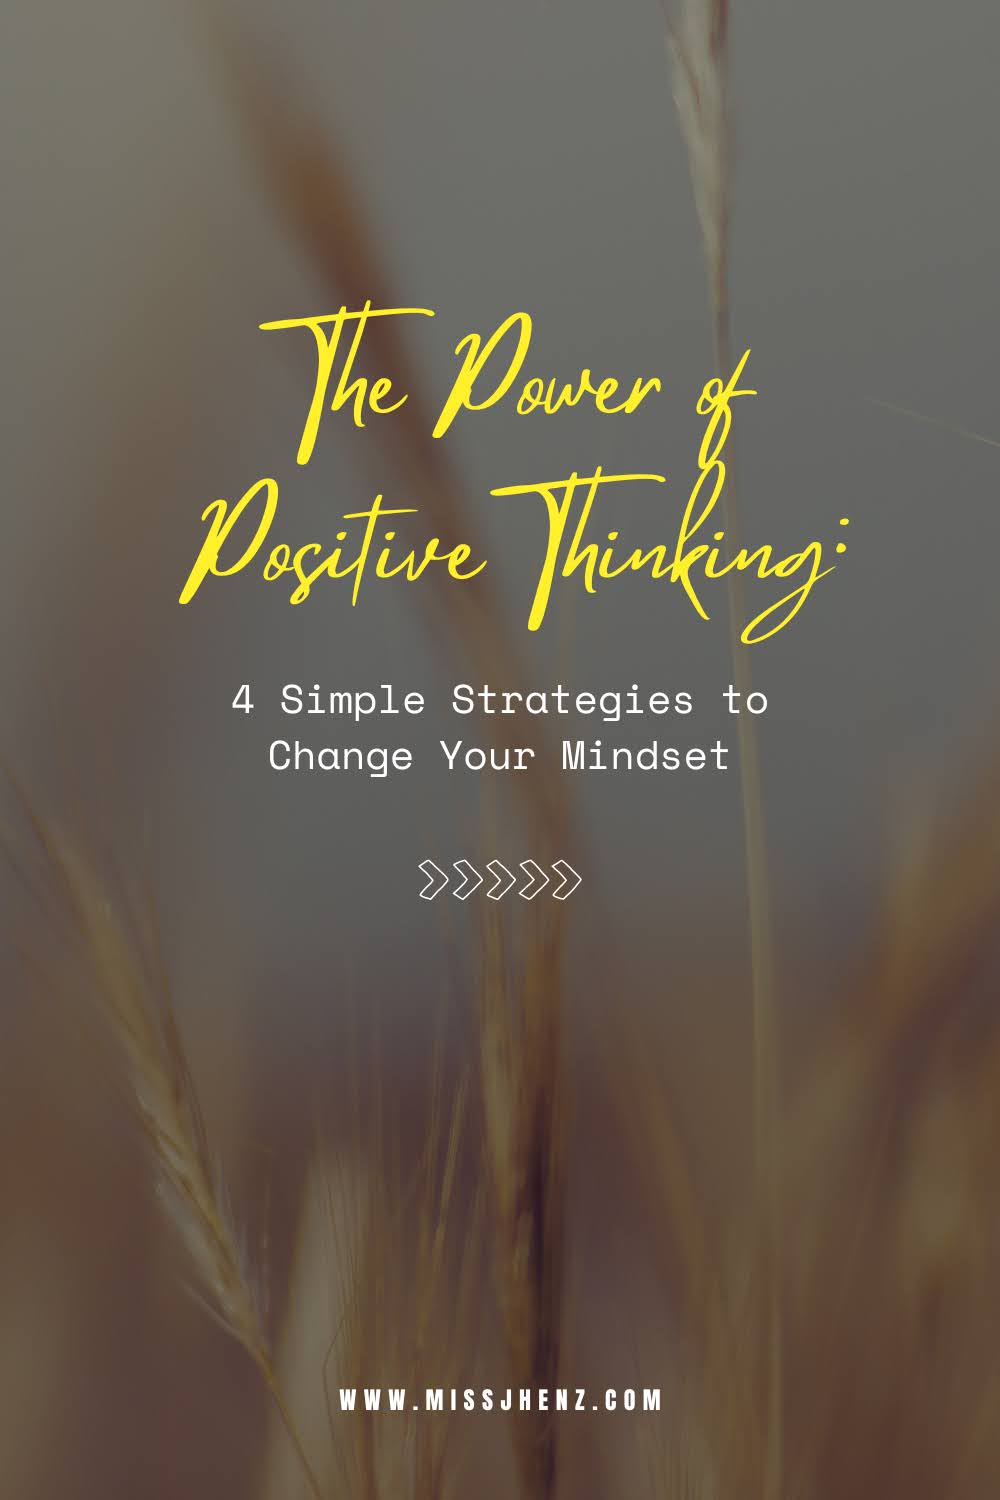 The Power of Positive Thinking: 4 Simple Strategies to Change Your Mindset